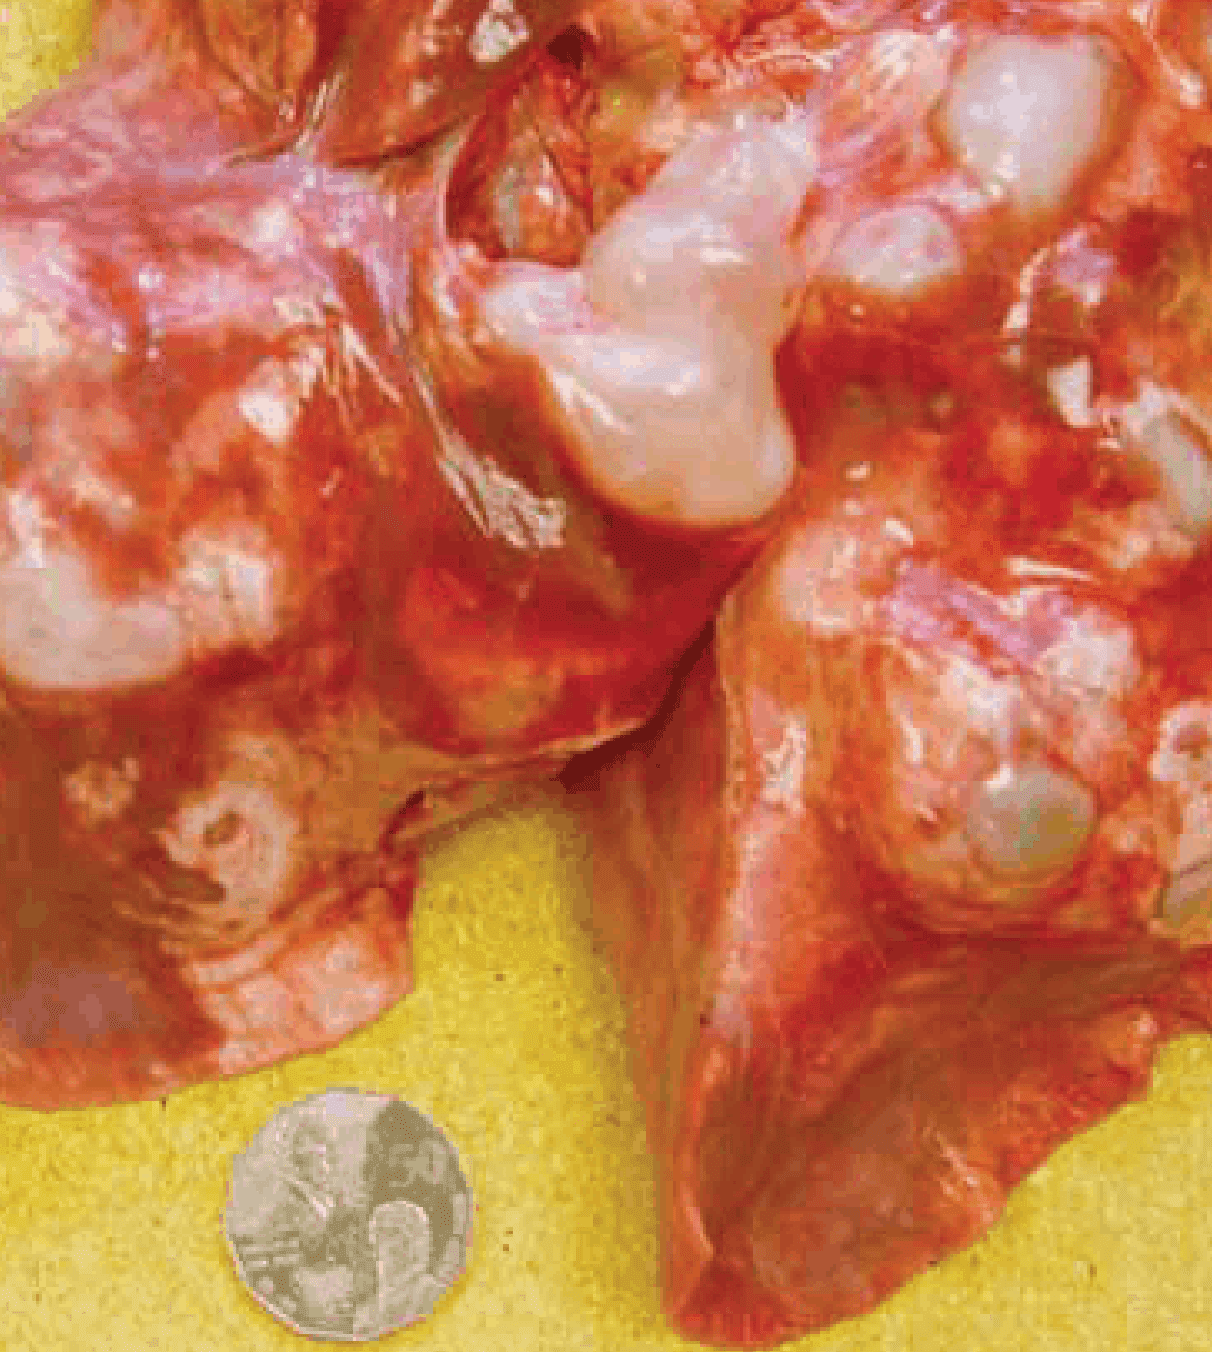 Hydatid cysts in a cow’s lung: if you find cysts like this in animals phone your vet. Photo courtesy: David Jenkins 